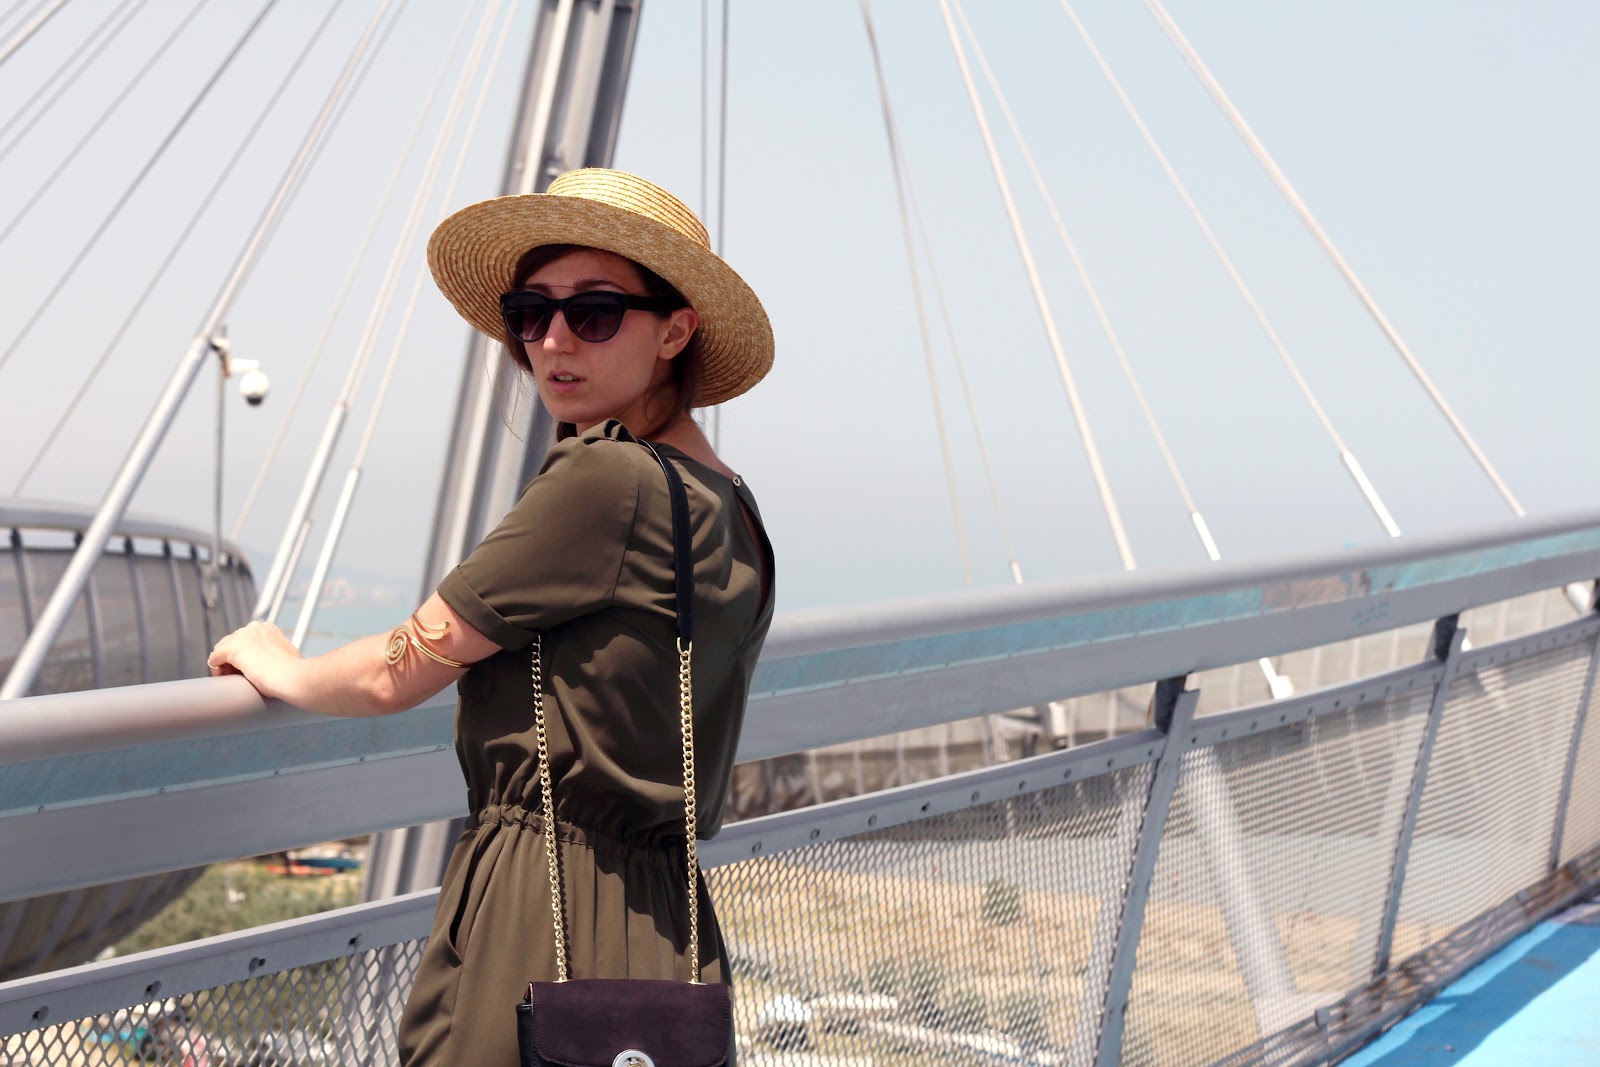 ashion style blogger outfit ootd italian girl italy trend vogue glamour pescara ponte del mare ovs ovspeople jumpsuit military green straw hat cappello paglia hm estate tutina ballerine stringate lacci lace up ballet shoes flats zara bag borsa tracolla ring middle finger